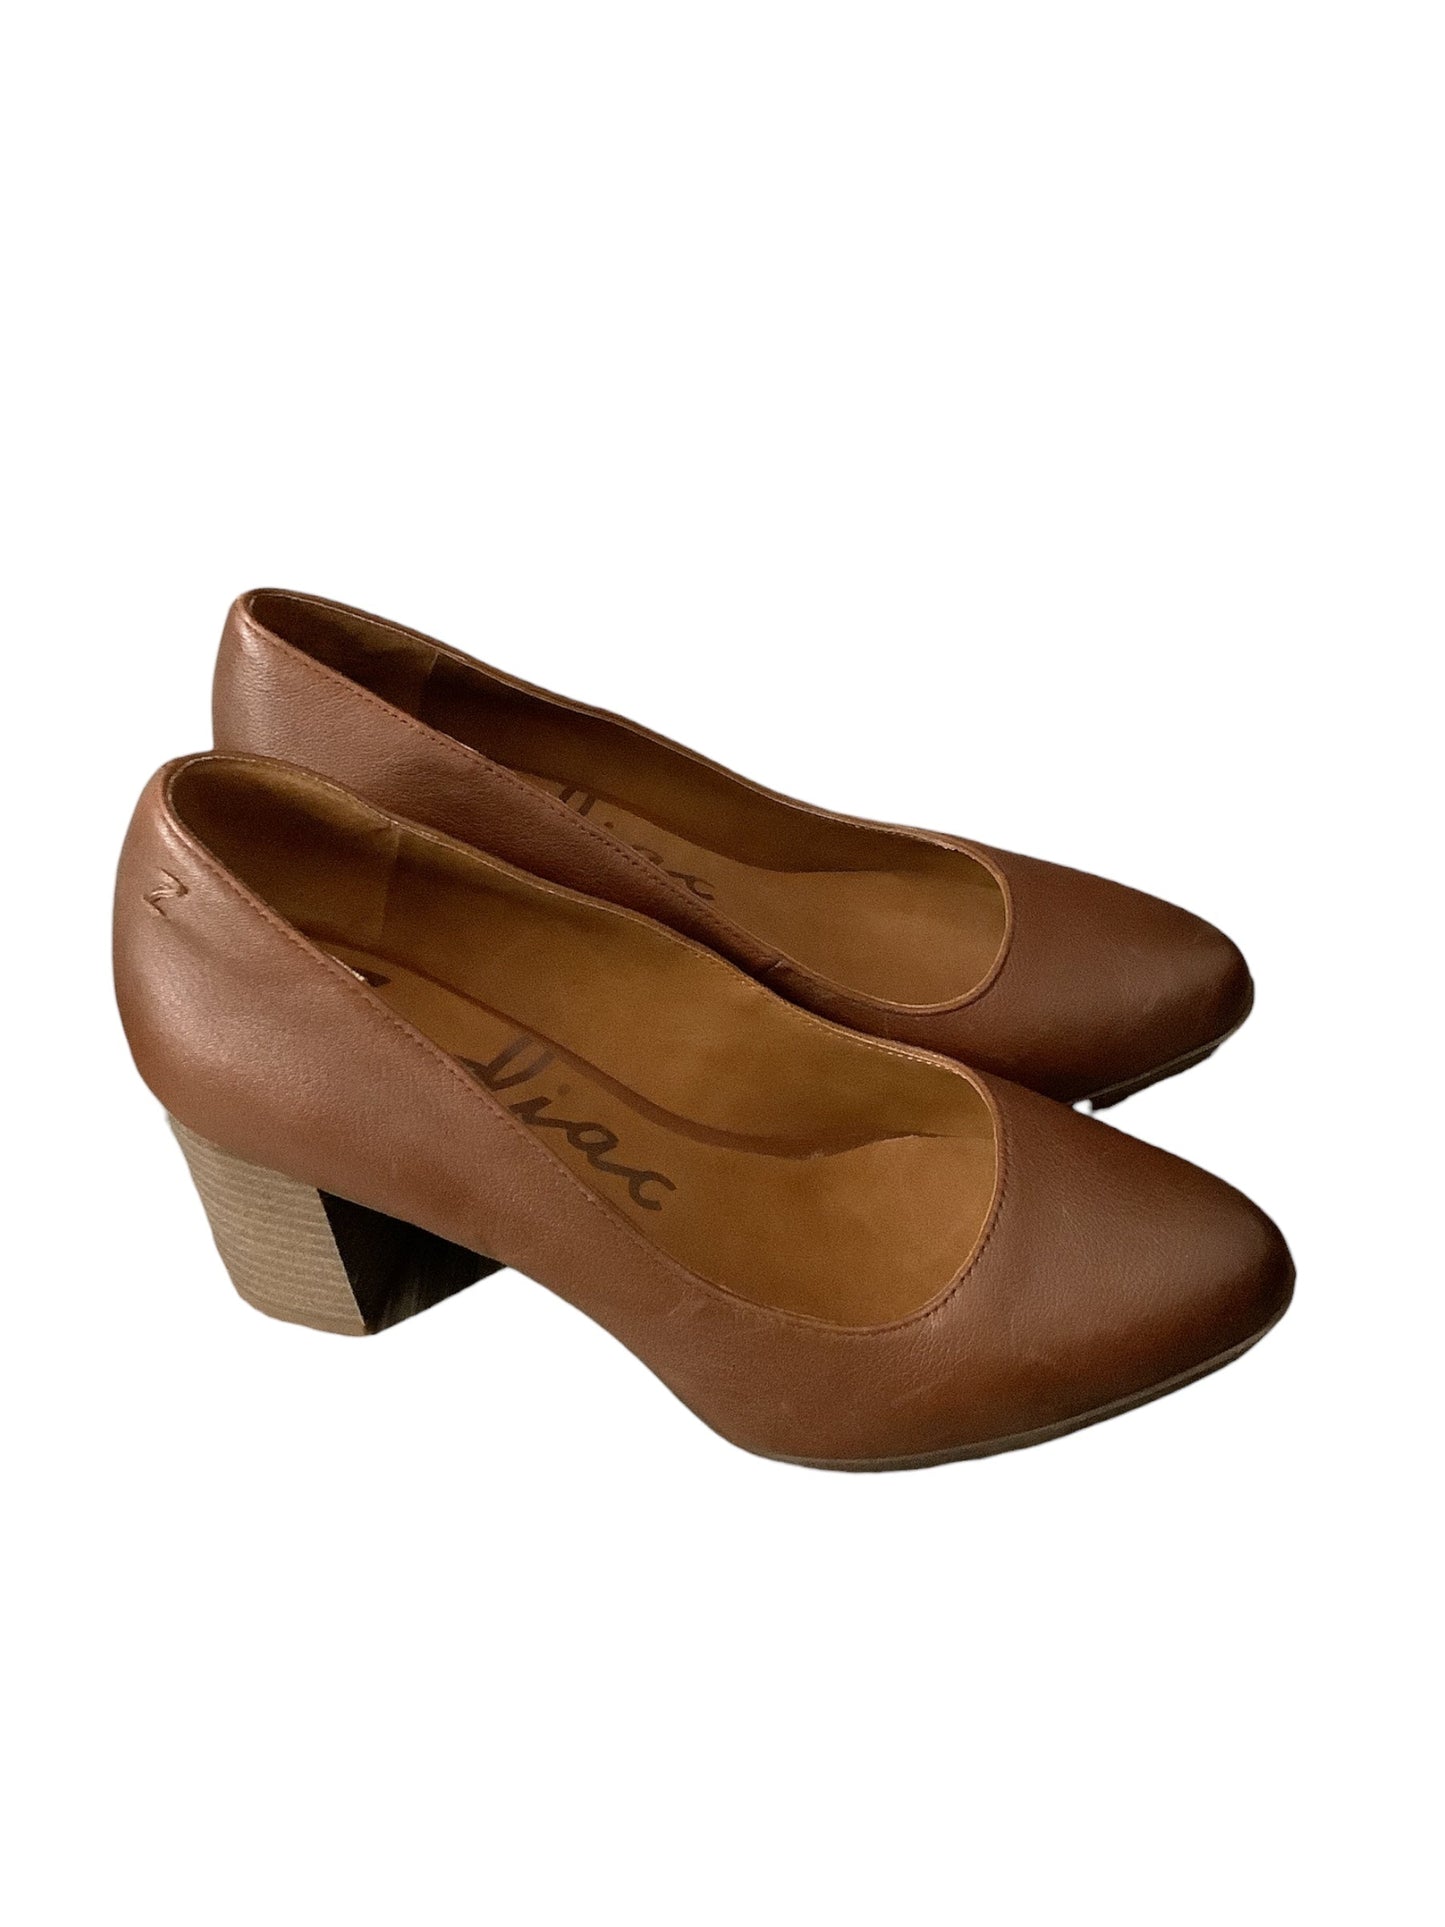 Brown Shoes Heels Block Clothes Mentor, Size 10